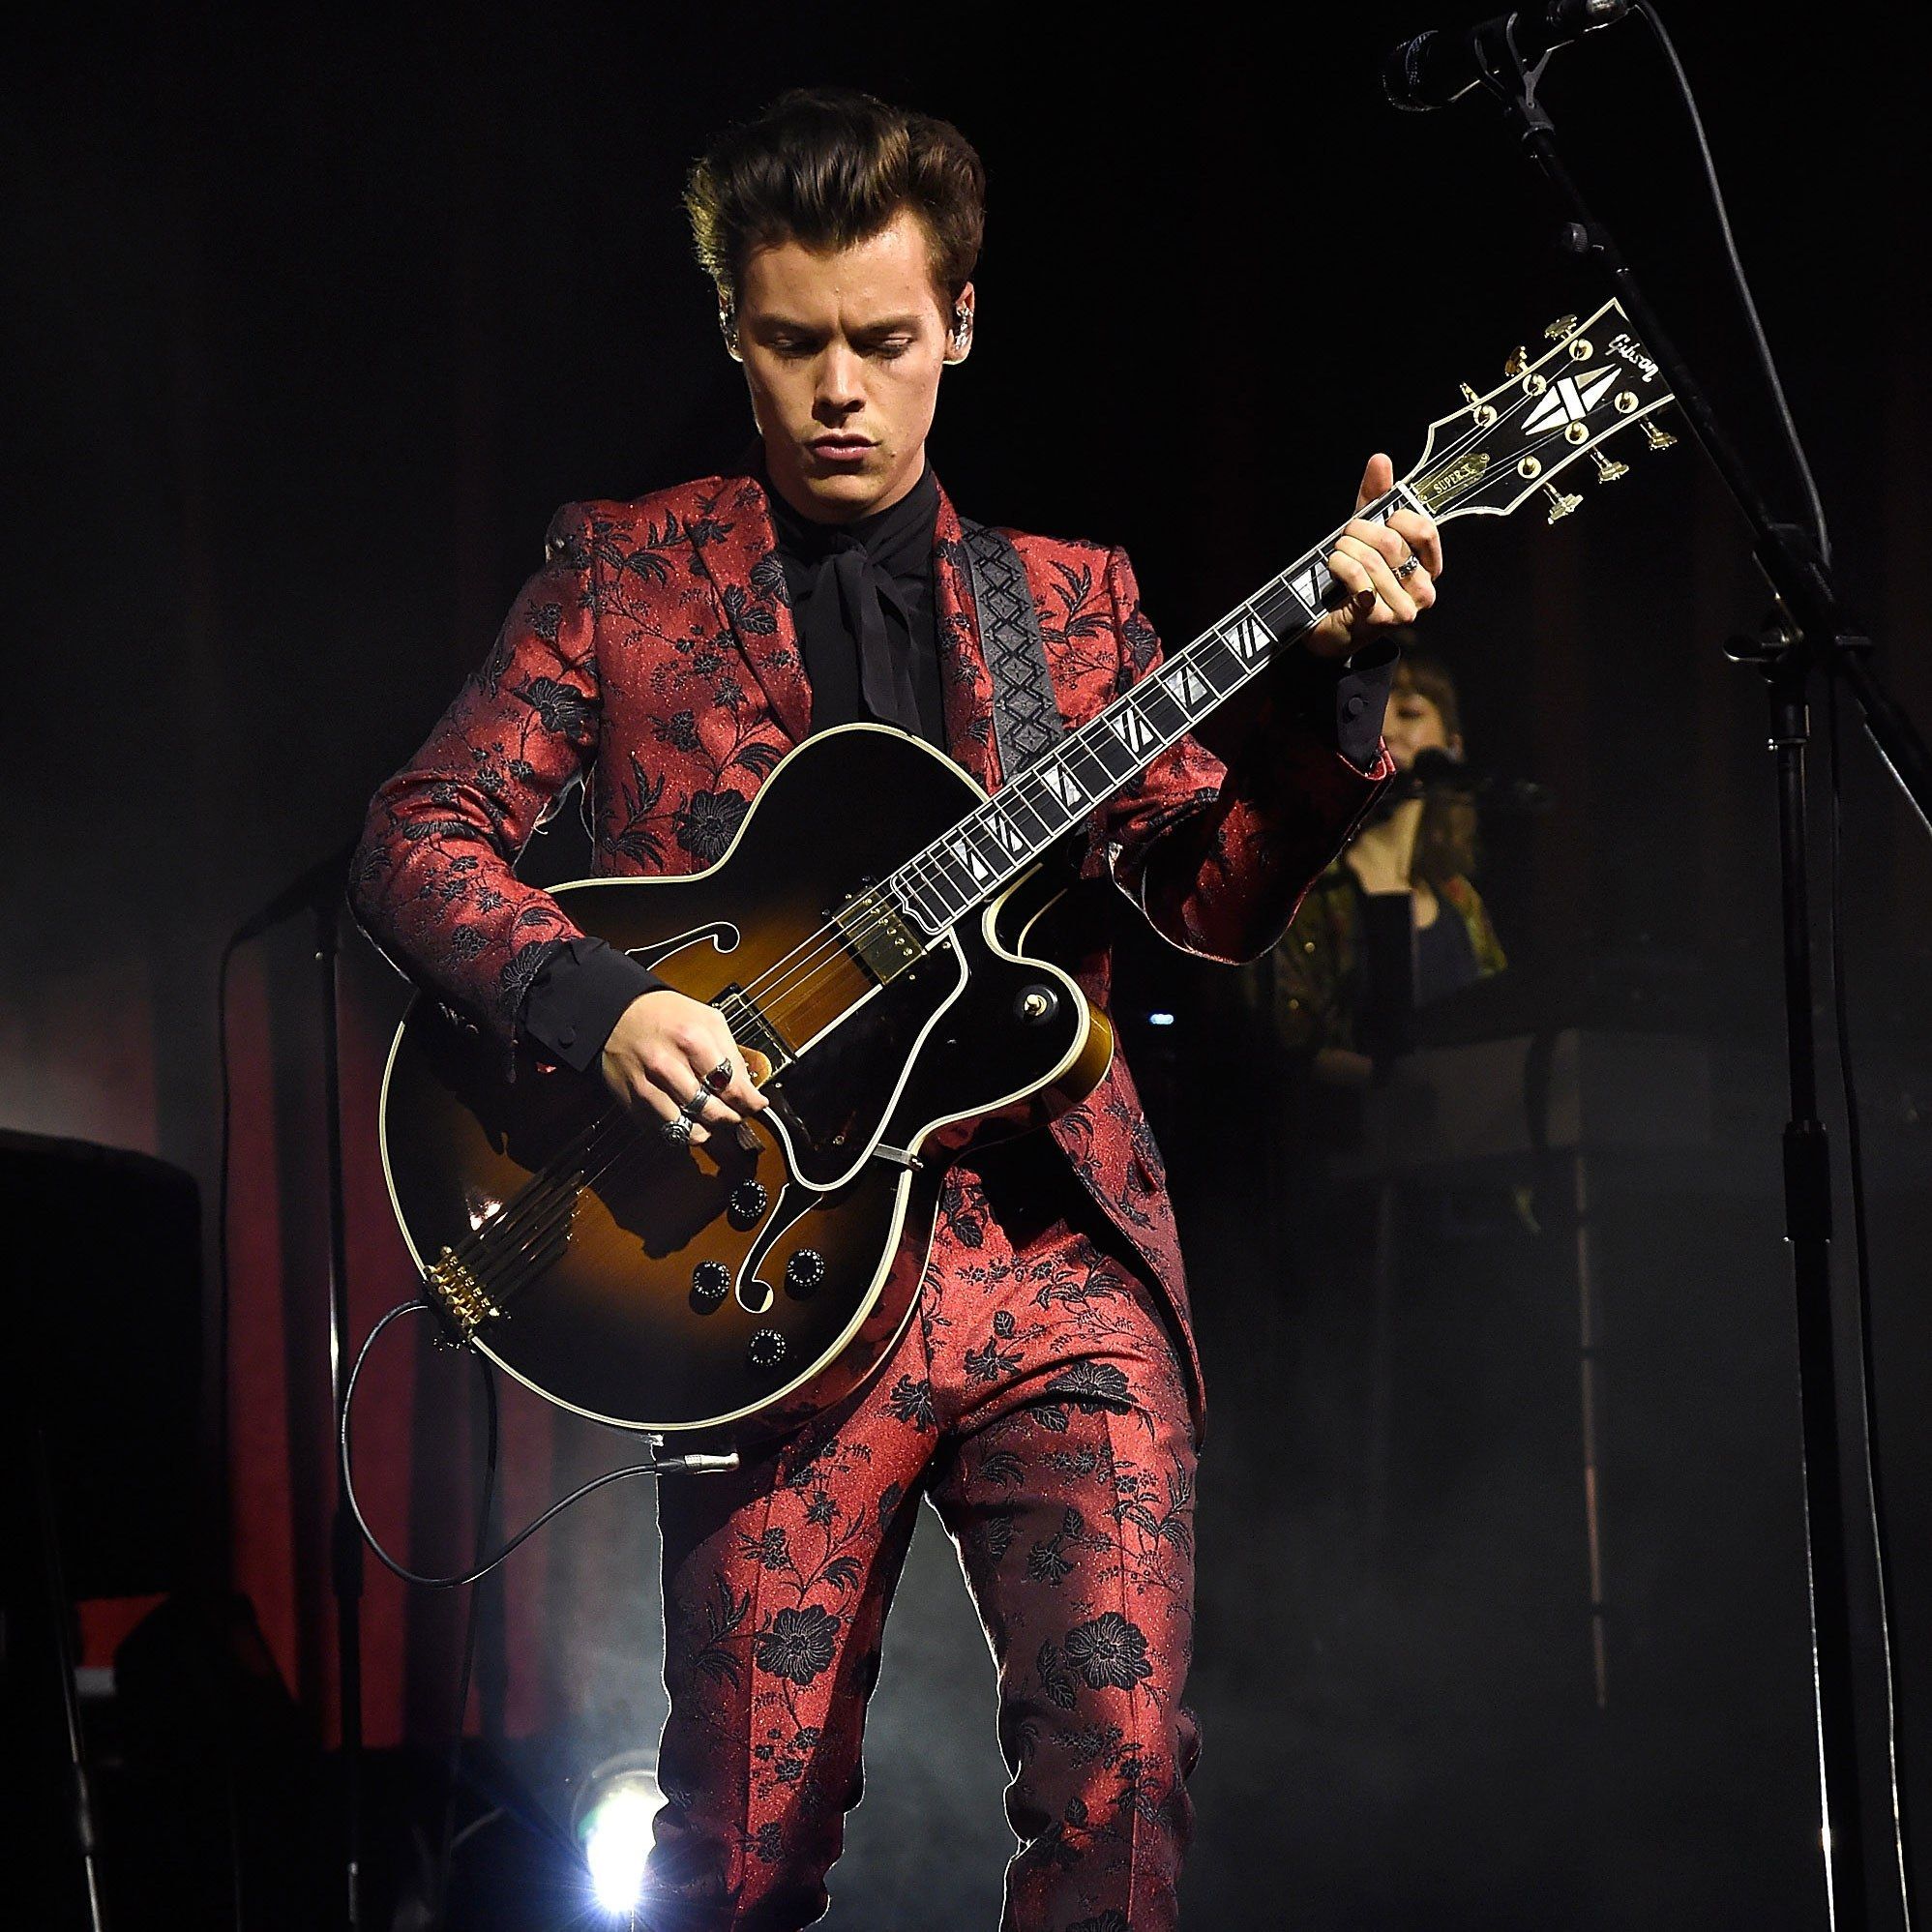 A man in red suit playing guitar on stage - Harry Styles